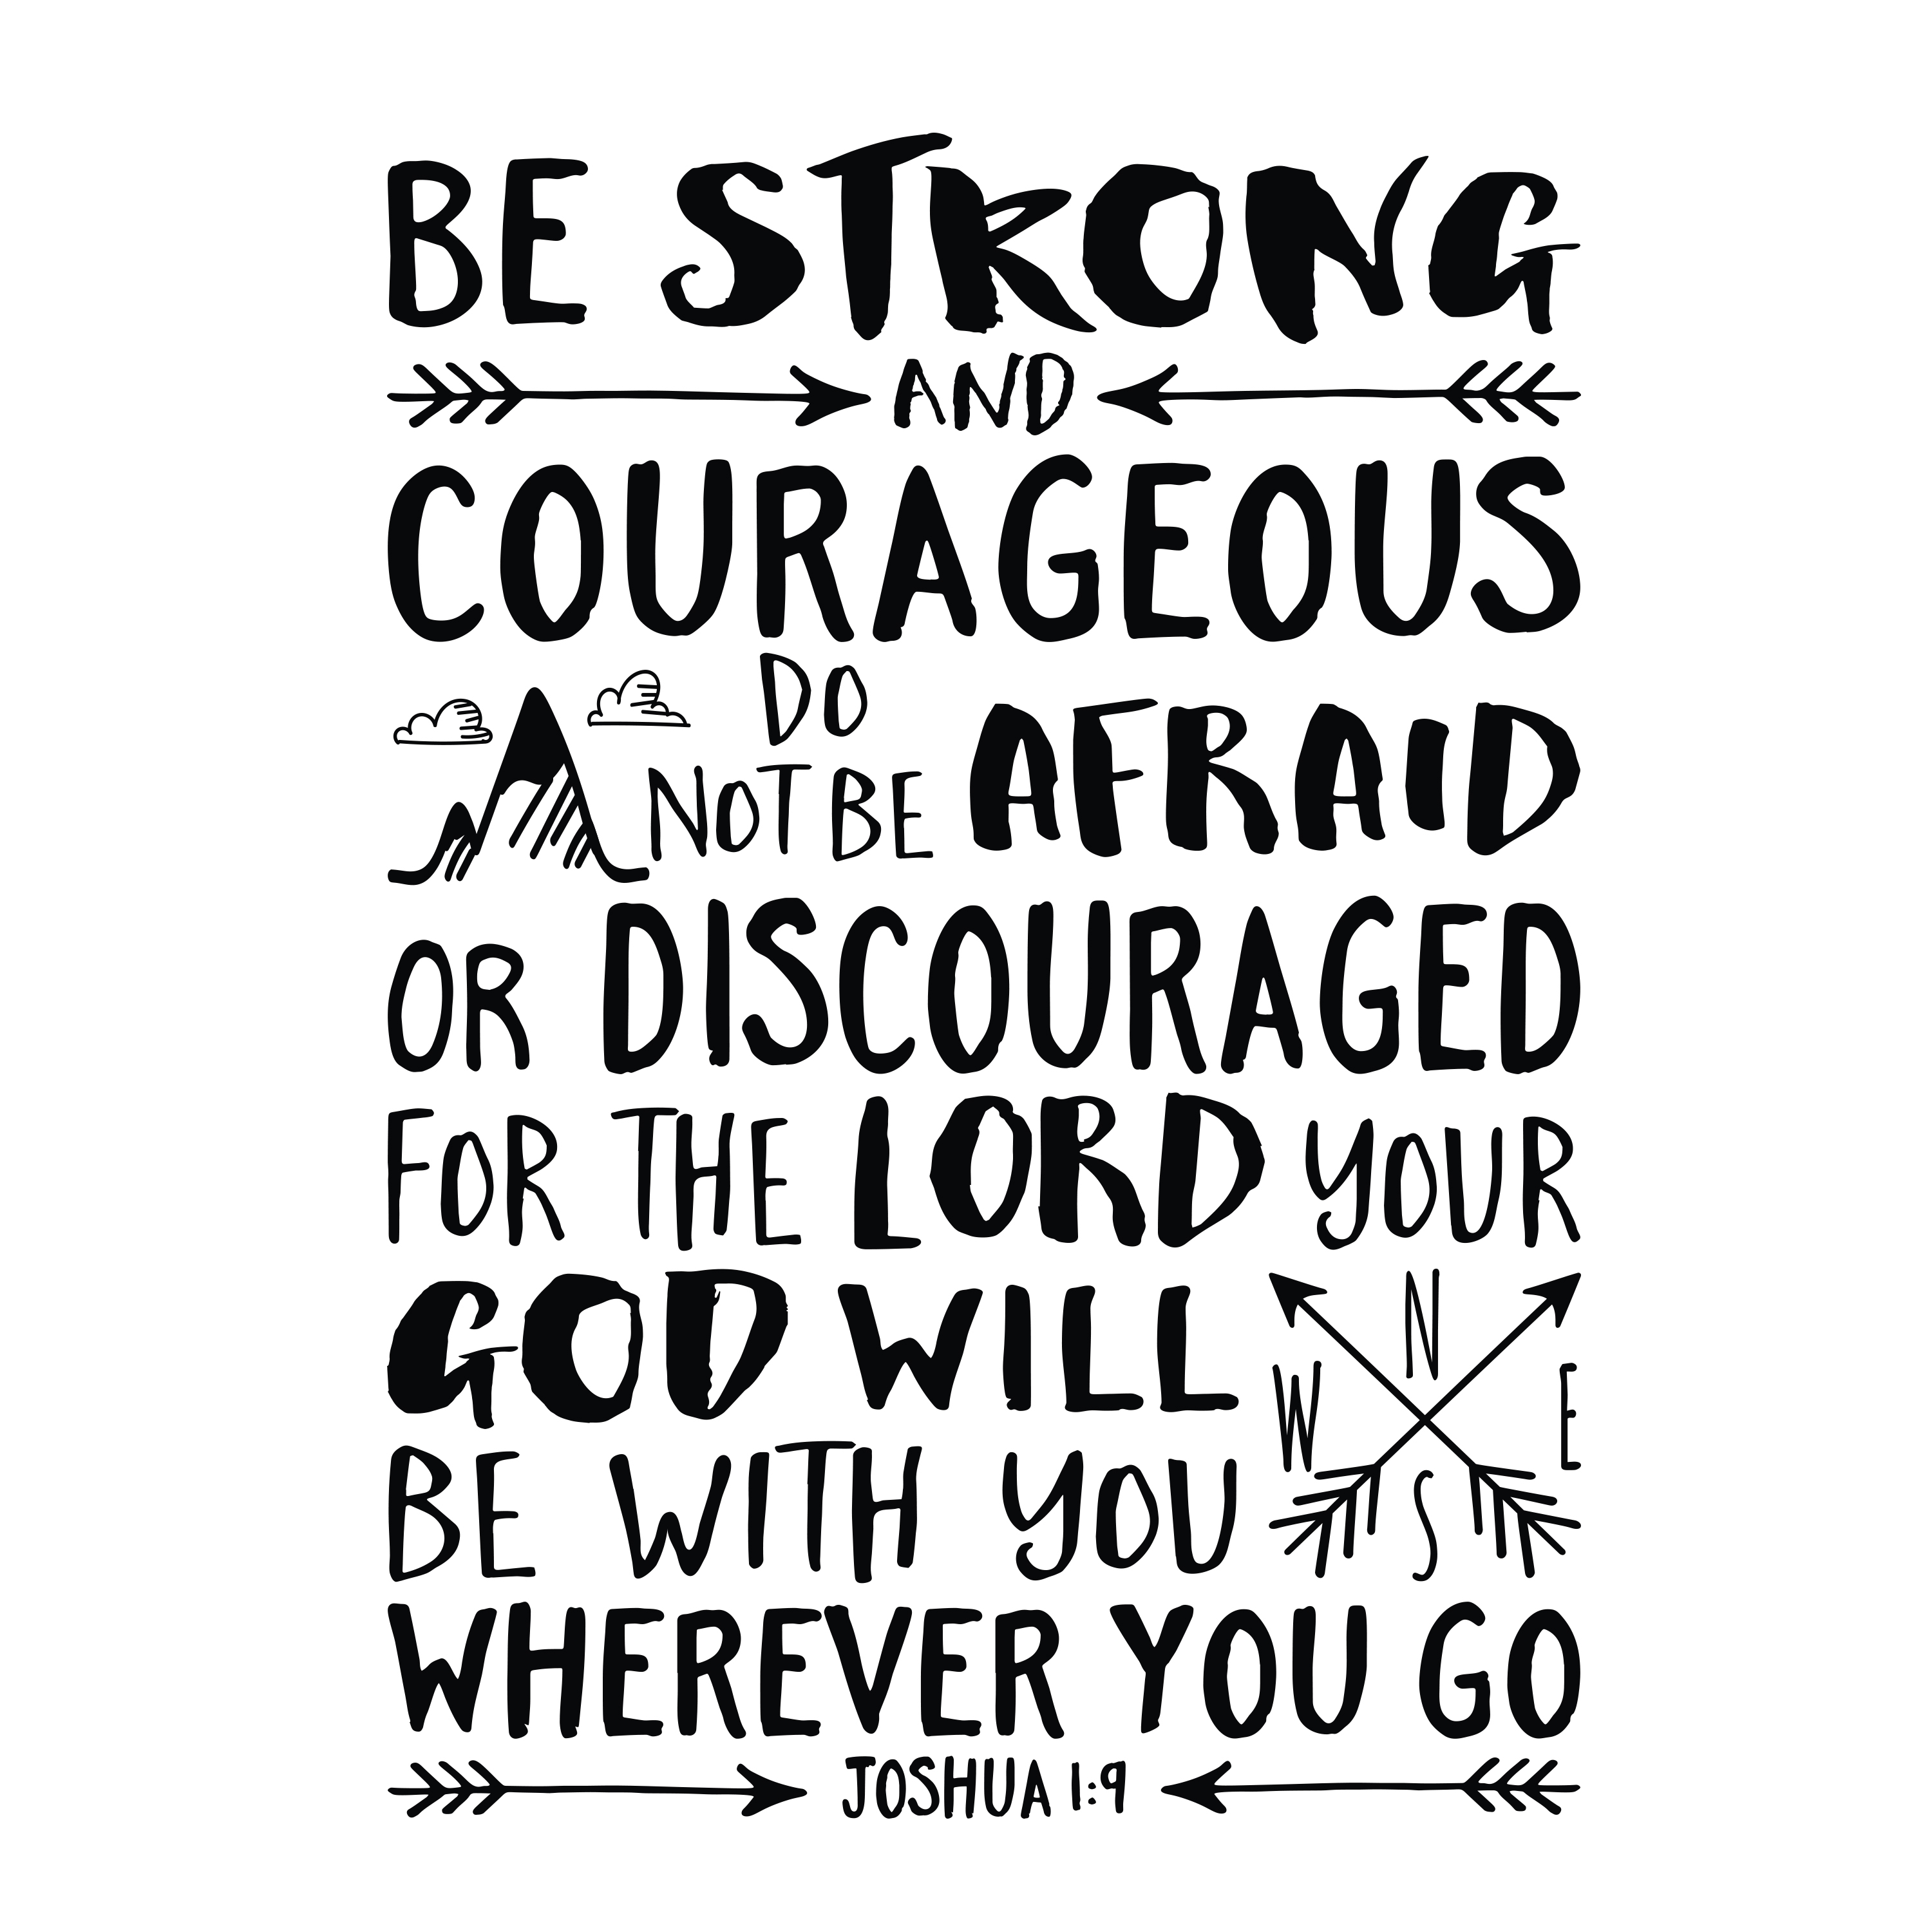 joshua-1v9-vinyl-wall-decal-42-be-strong-and-courageous